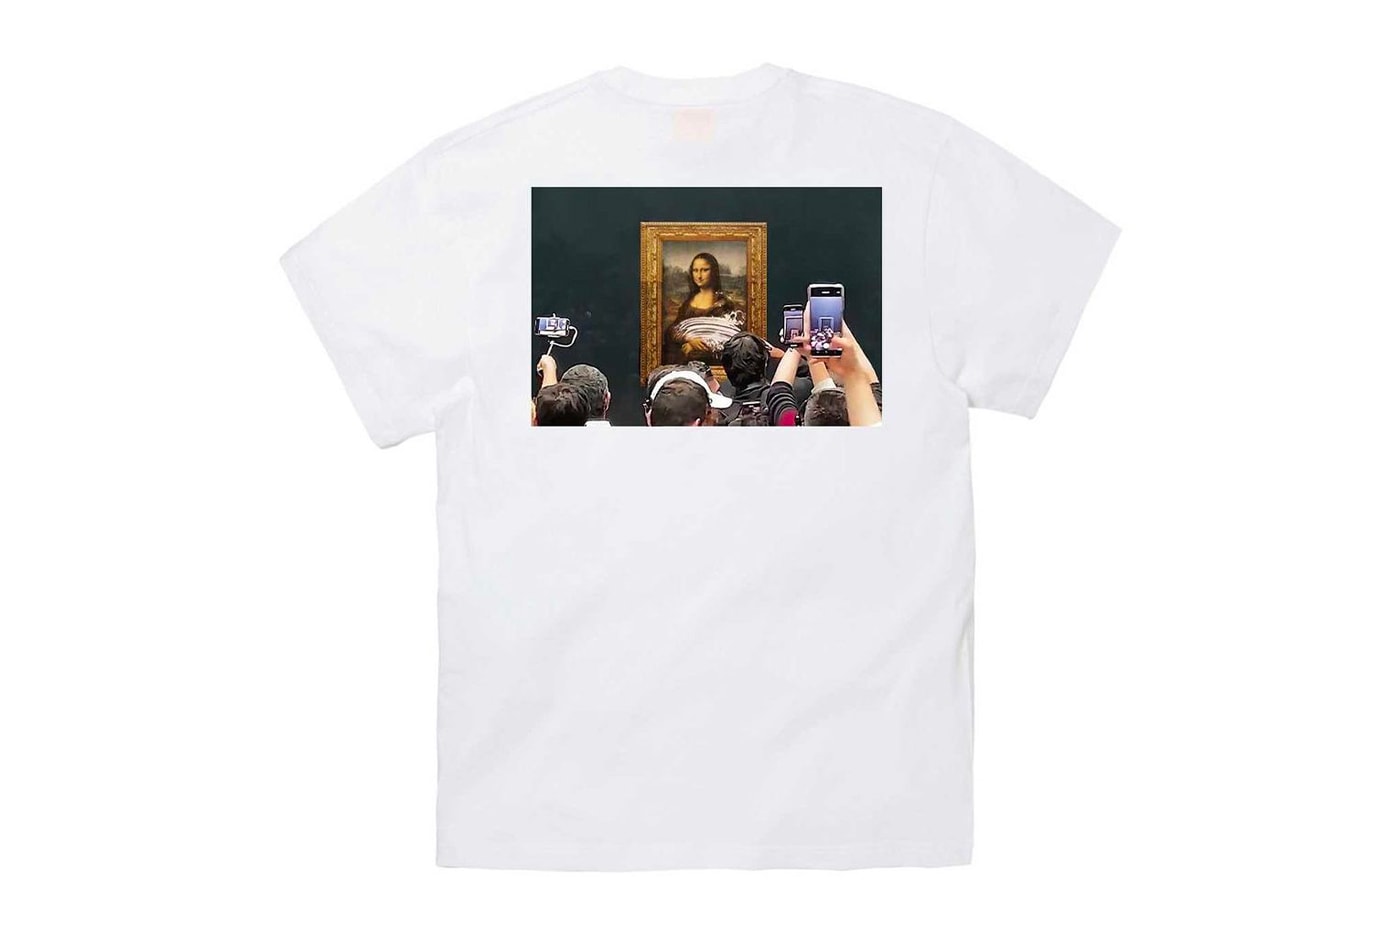 #FR2 がケーキを投げつけられた“モナリザ”の T シャツを発売 FR2 fxxking rabbits mona lisa cake smash graphic tee white a piece of cake yellow funny release info date price